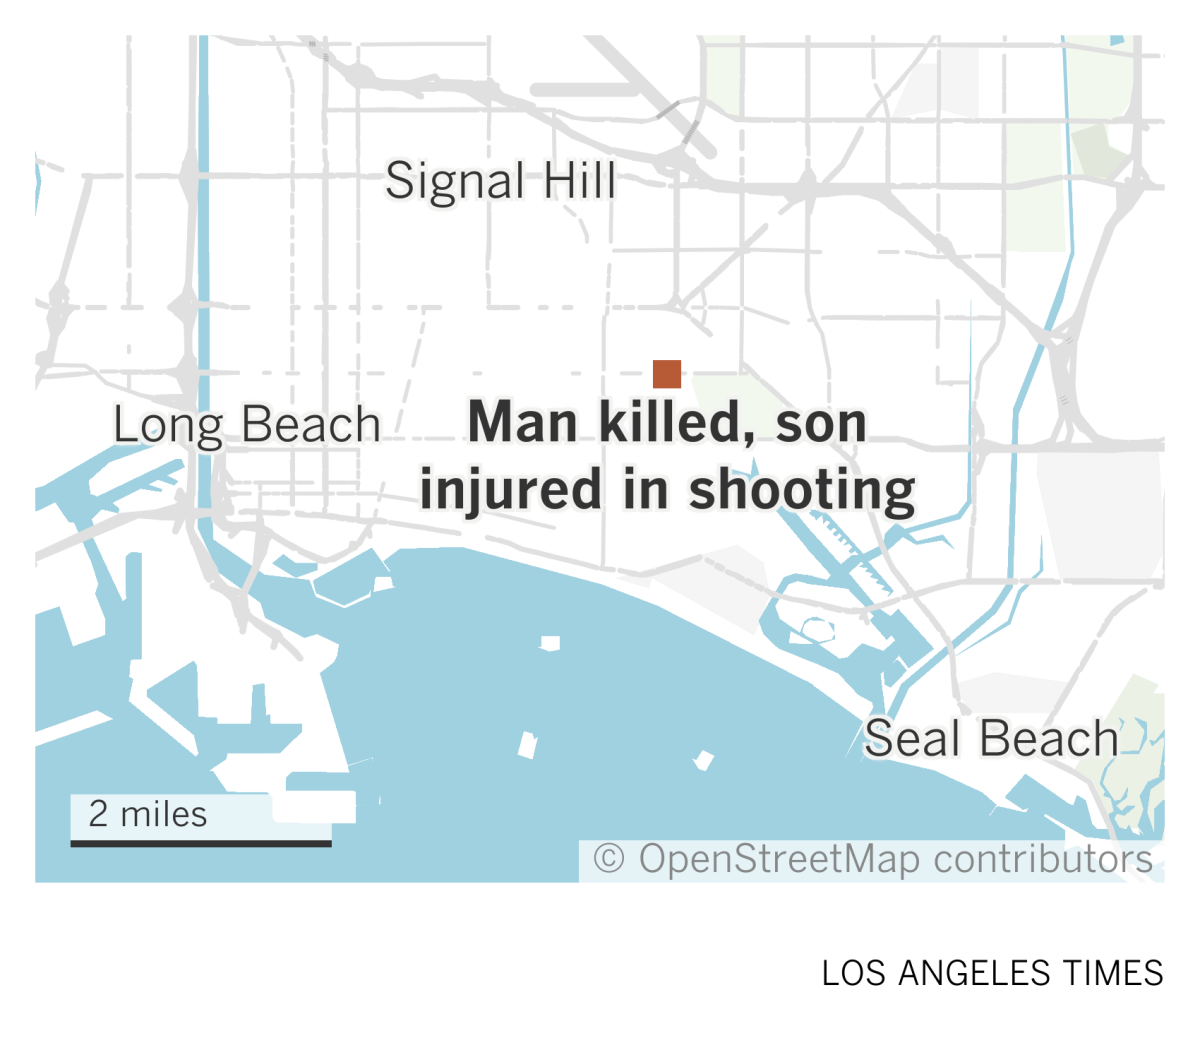 A map of Long Beach and surrounding areas shows where a man was found mortally wounded and his son injured after a shooting